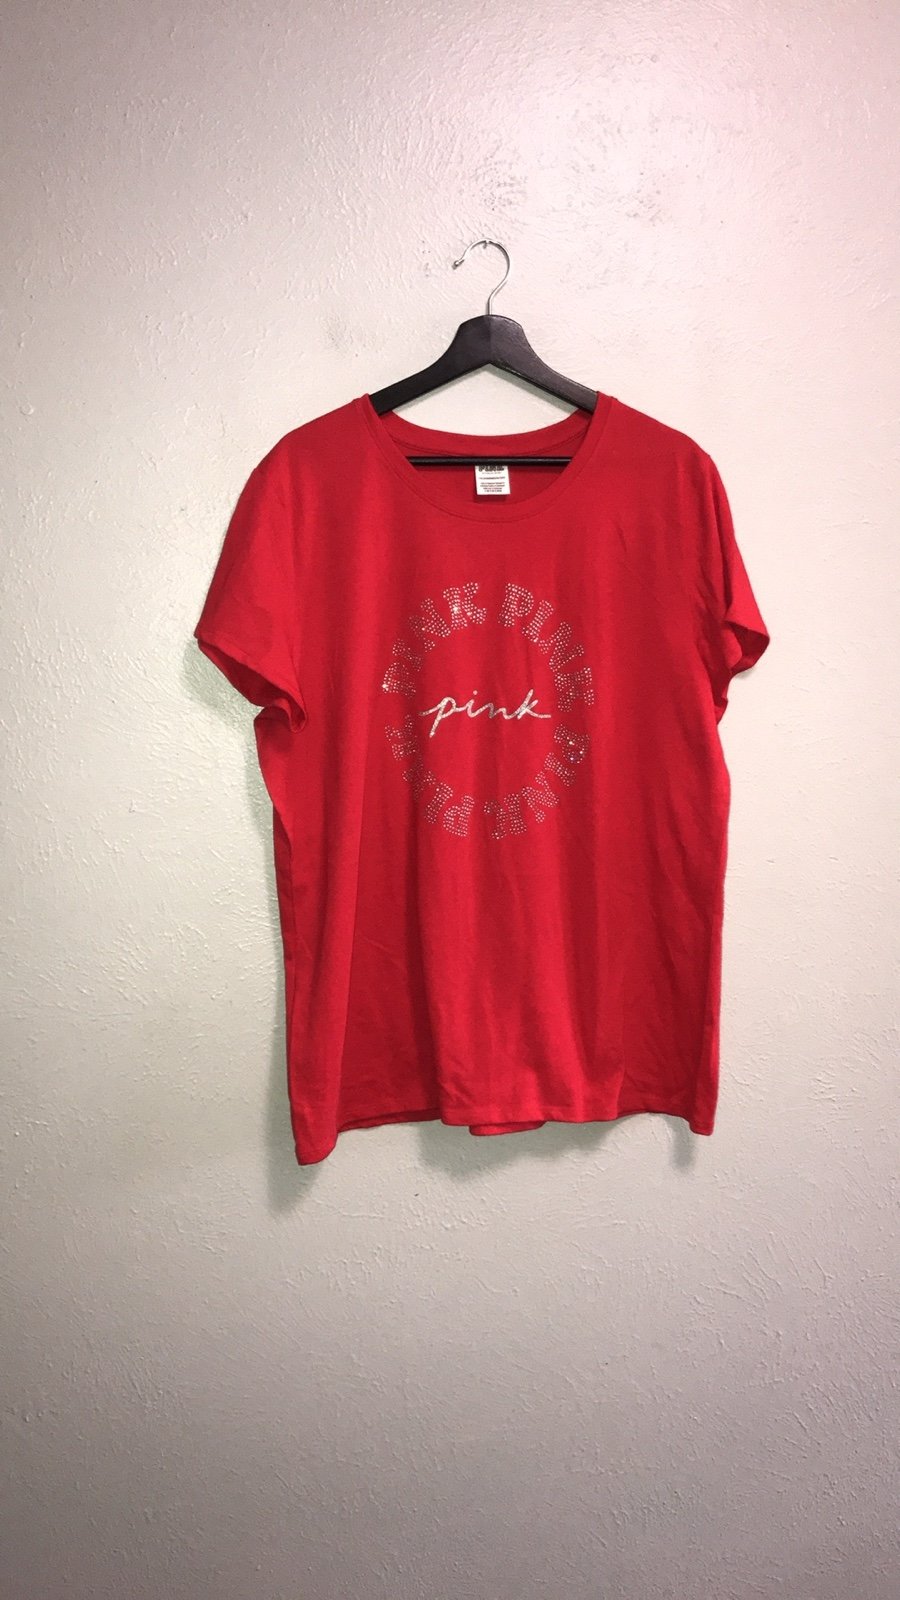 the Lowest price Vs shirt nwt JN2GzY08g Online Exclusive